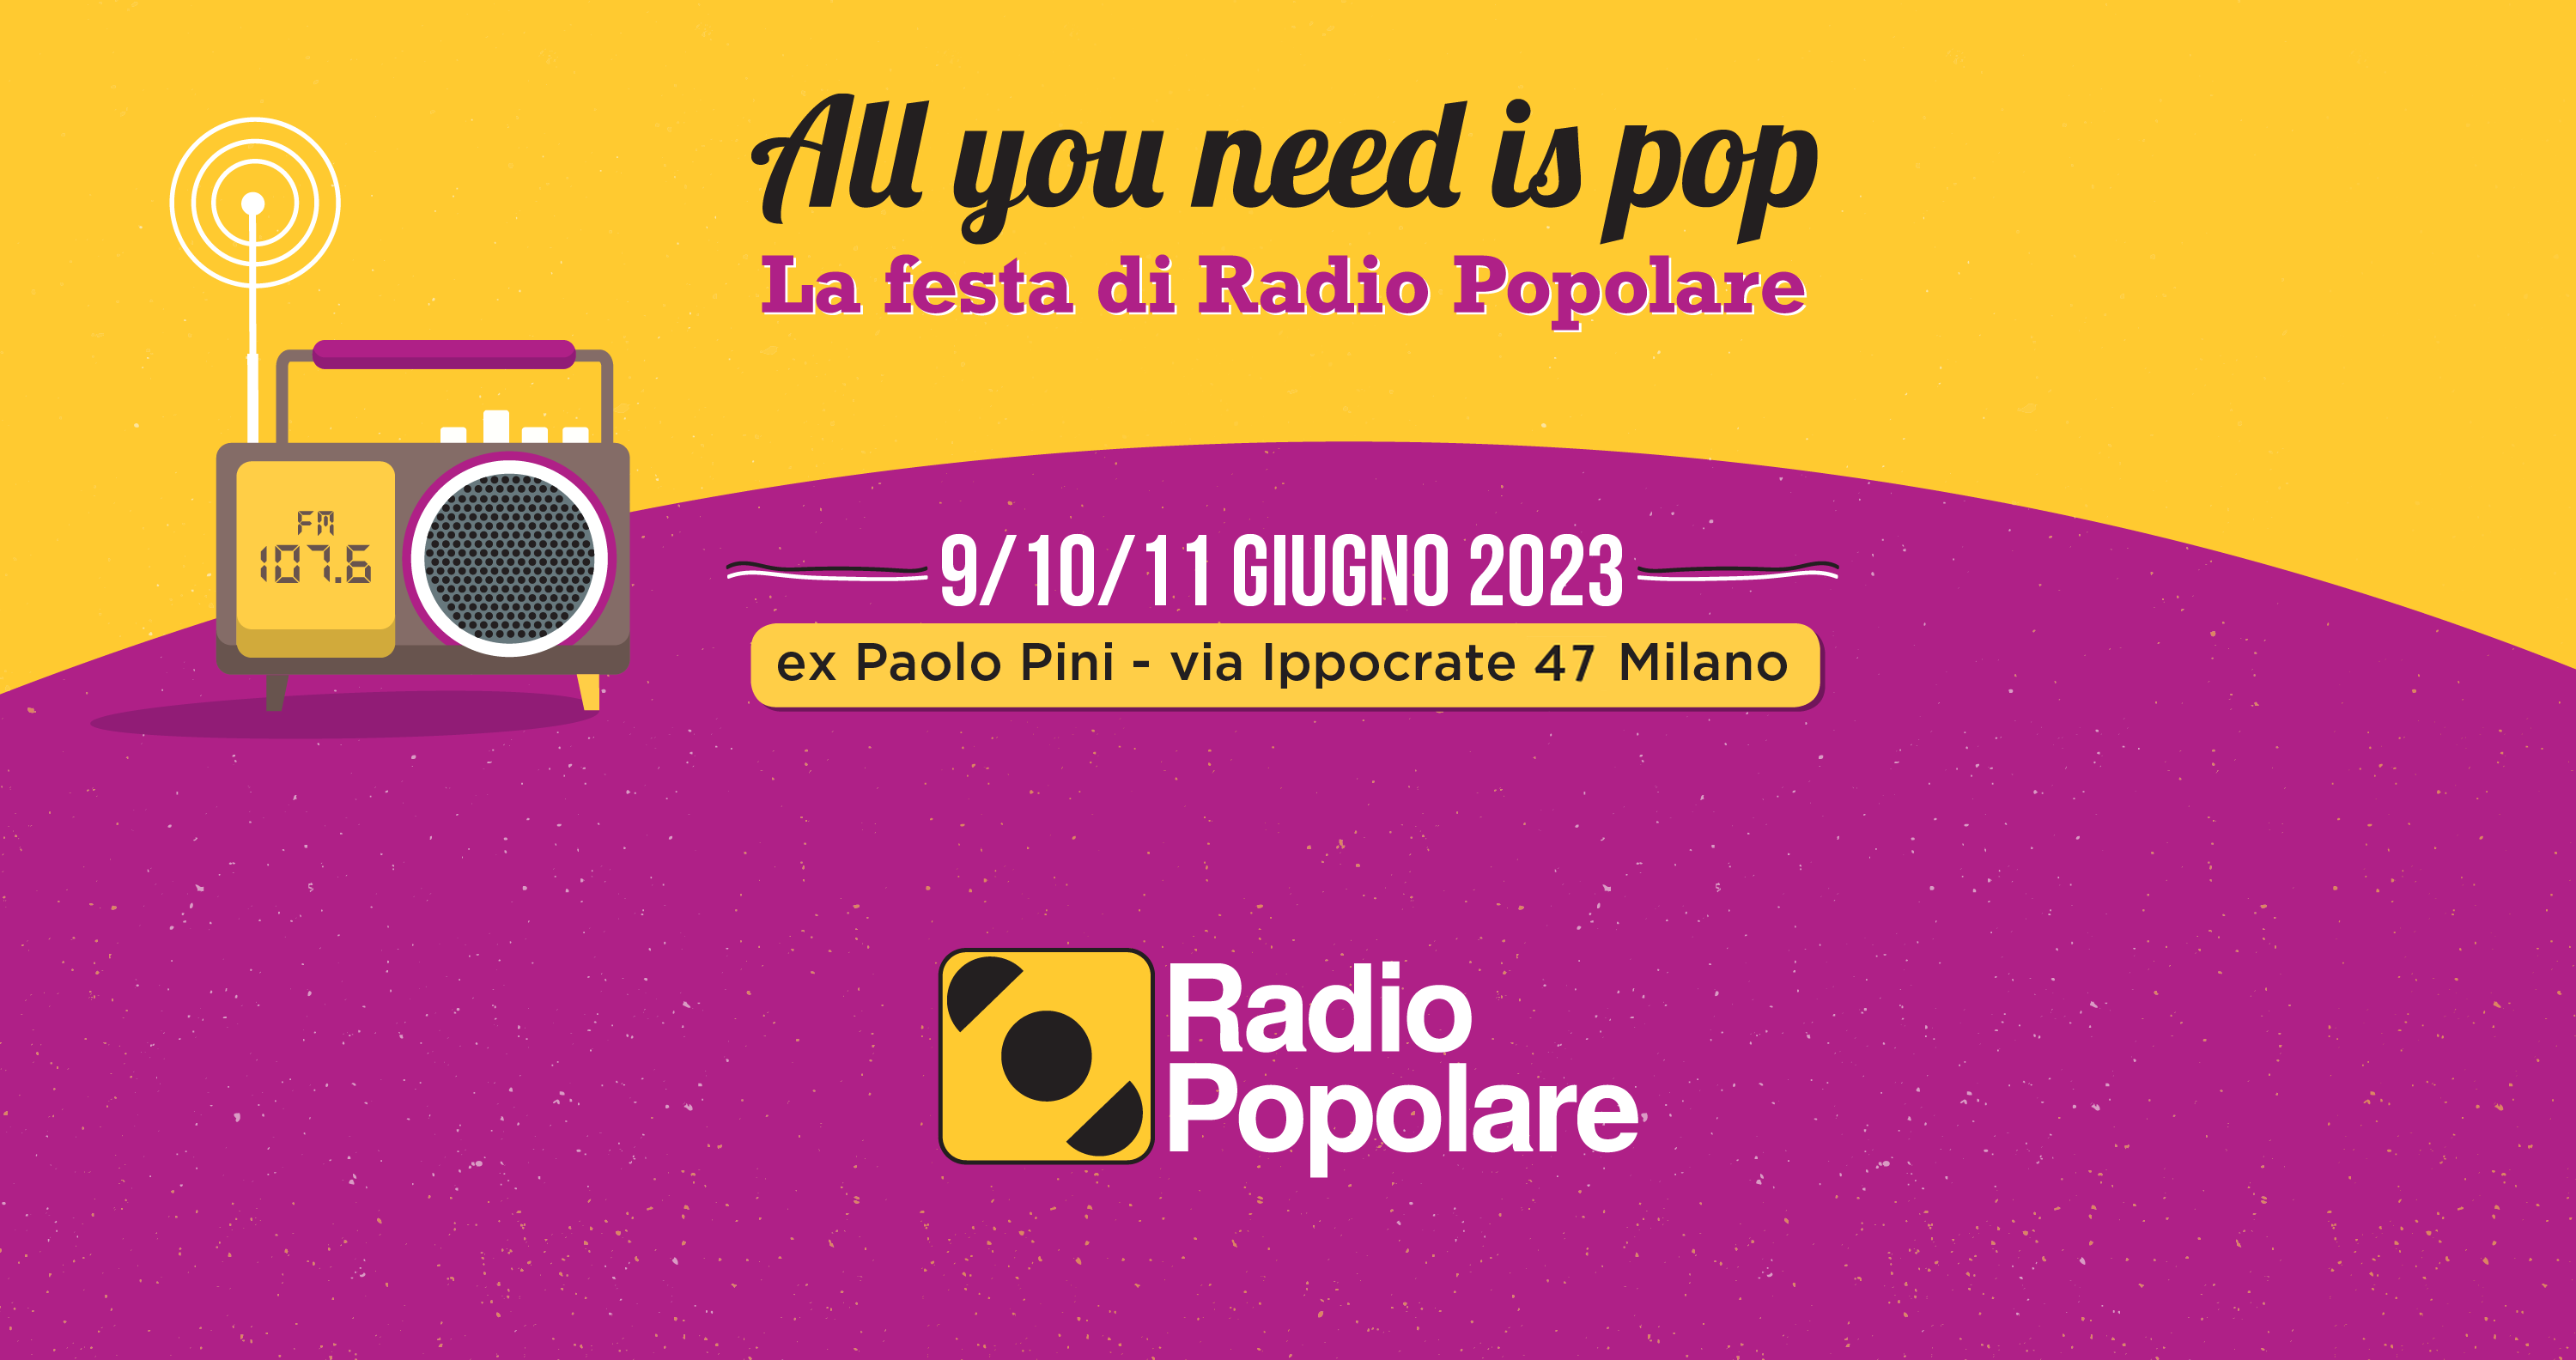 All you need is pop 2023: il programma